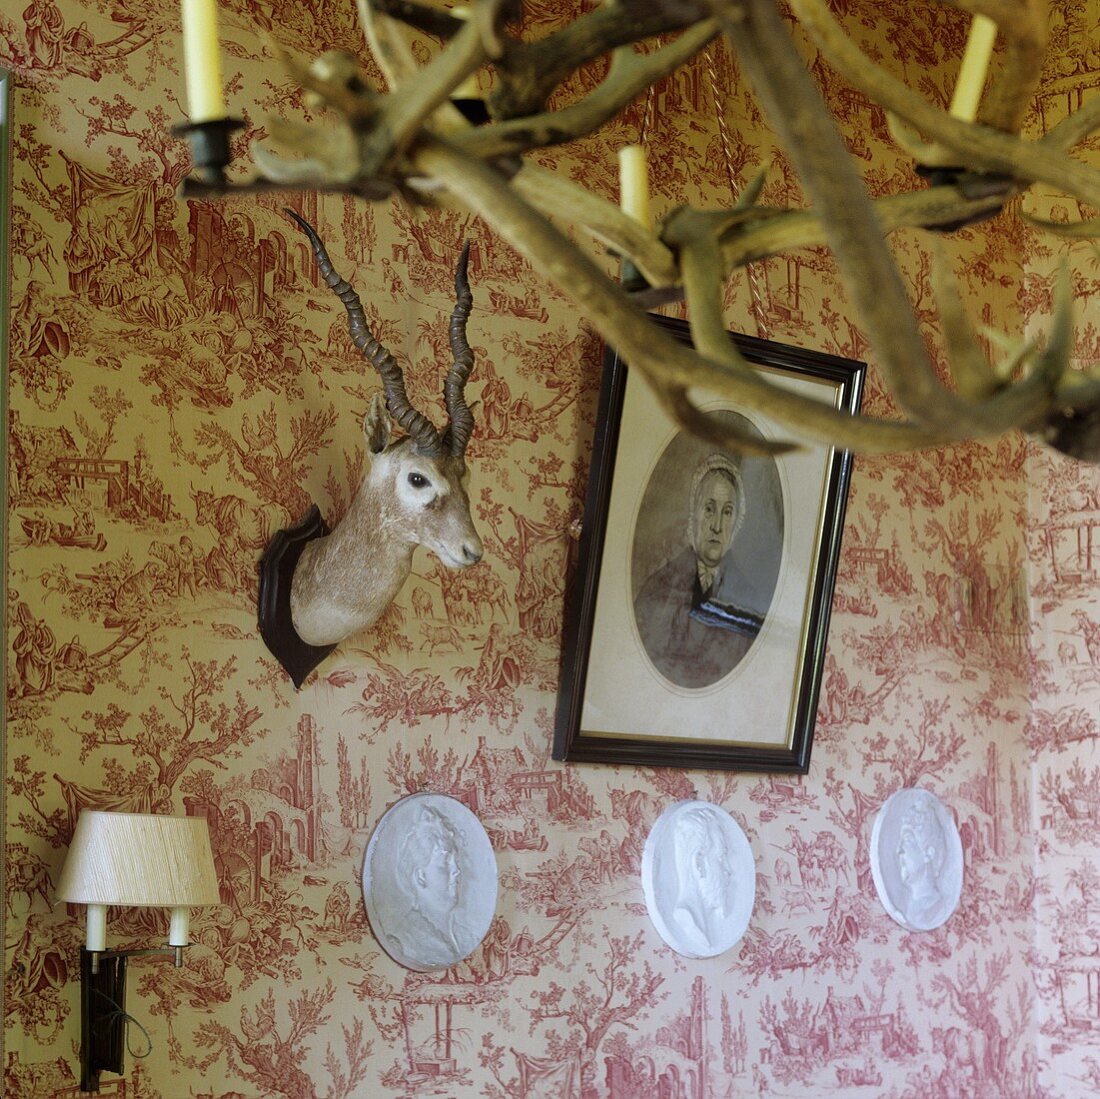 A stuffed animal head and a picture hanging on a wall with patterned wallpaper